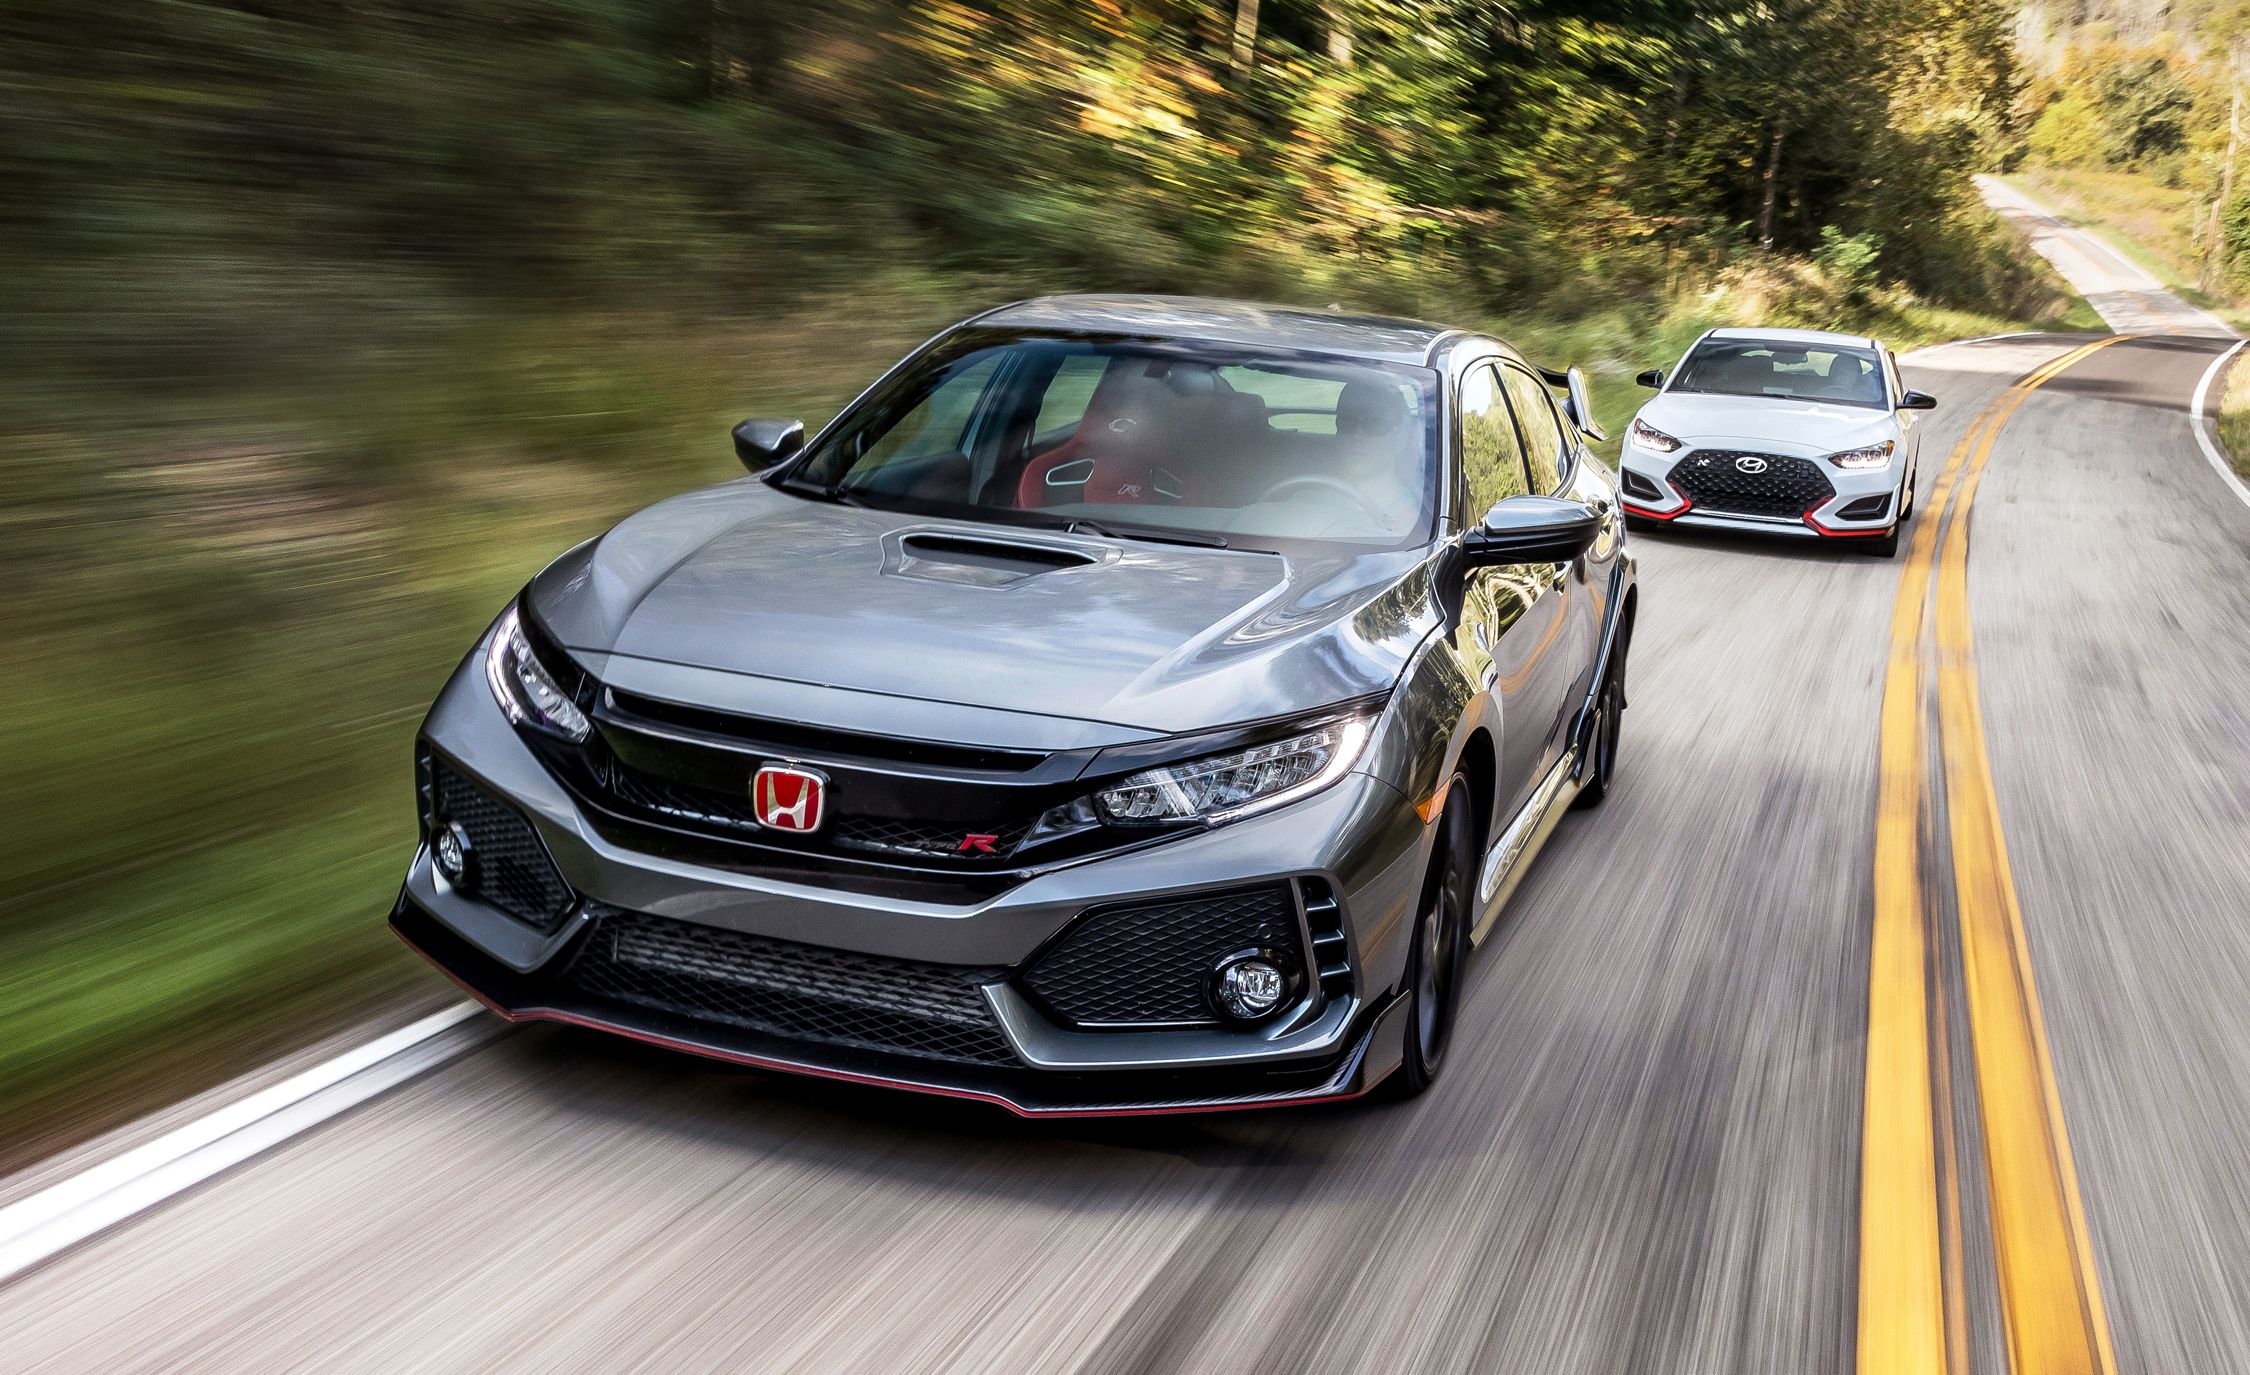 Lightweight 2021 Honda Civic Type R Limited Edition Starts at $44,950